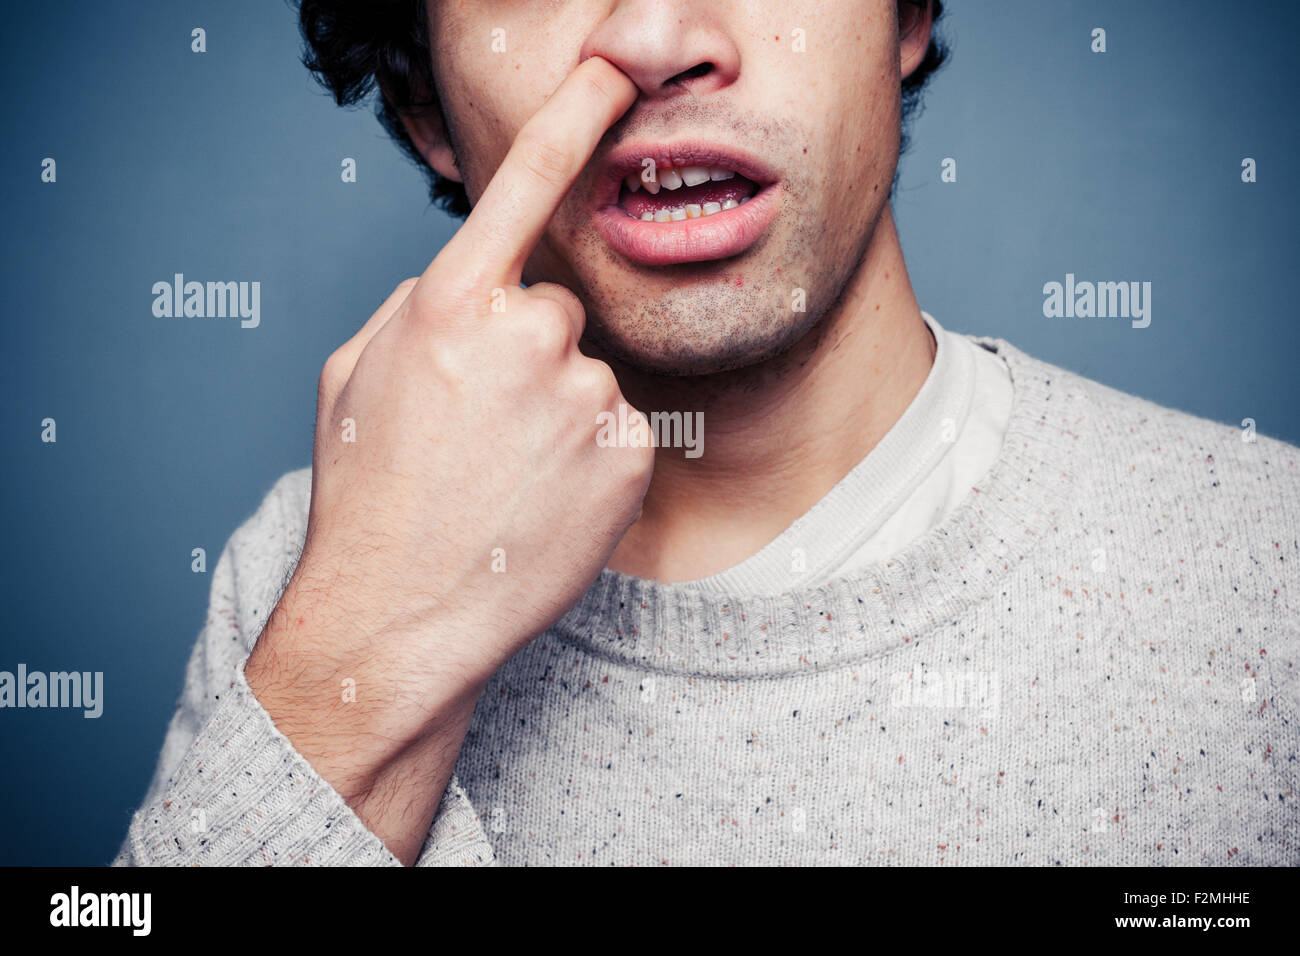 Young man picking his nose Stock Photo